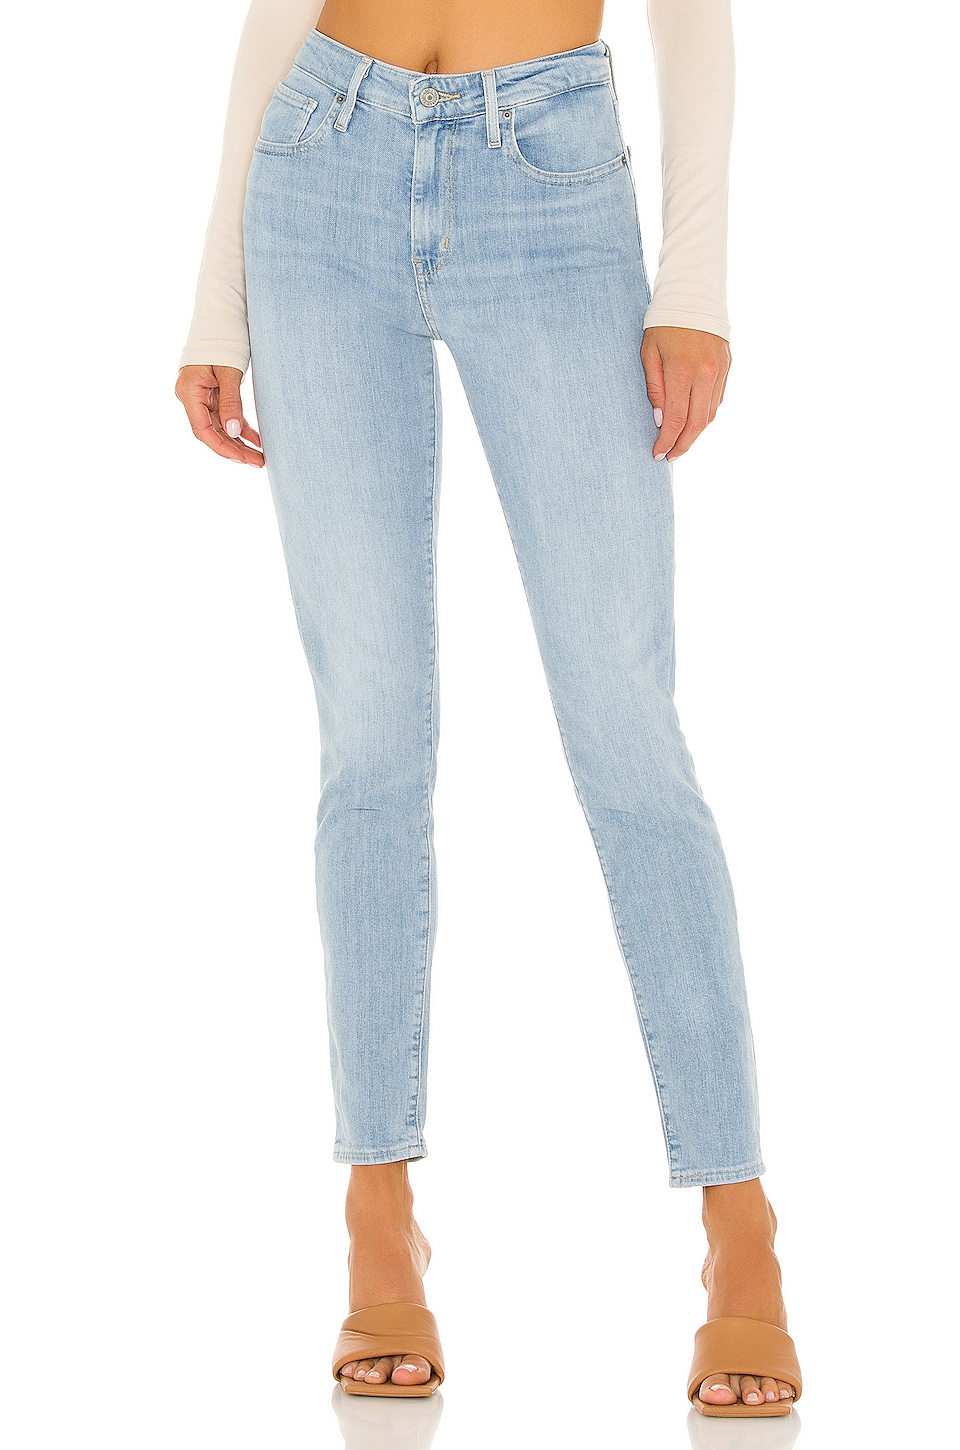 LEVI'S 721 High Rise Skinny Jean in Snatched | REVOLVE